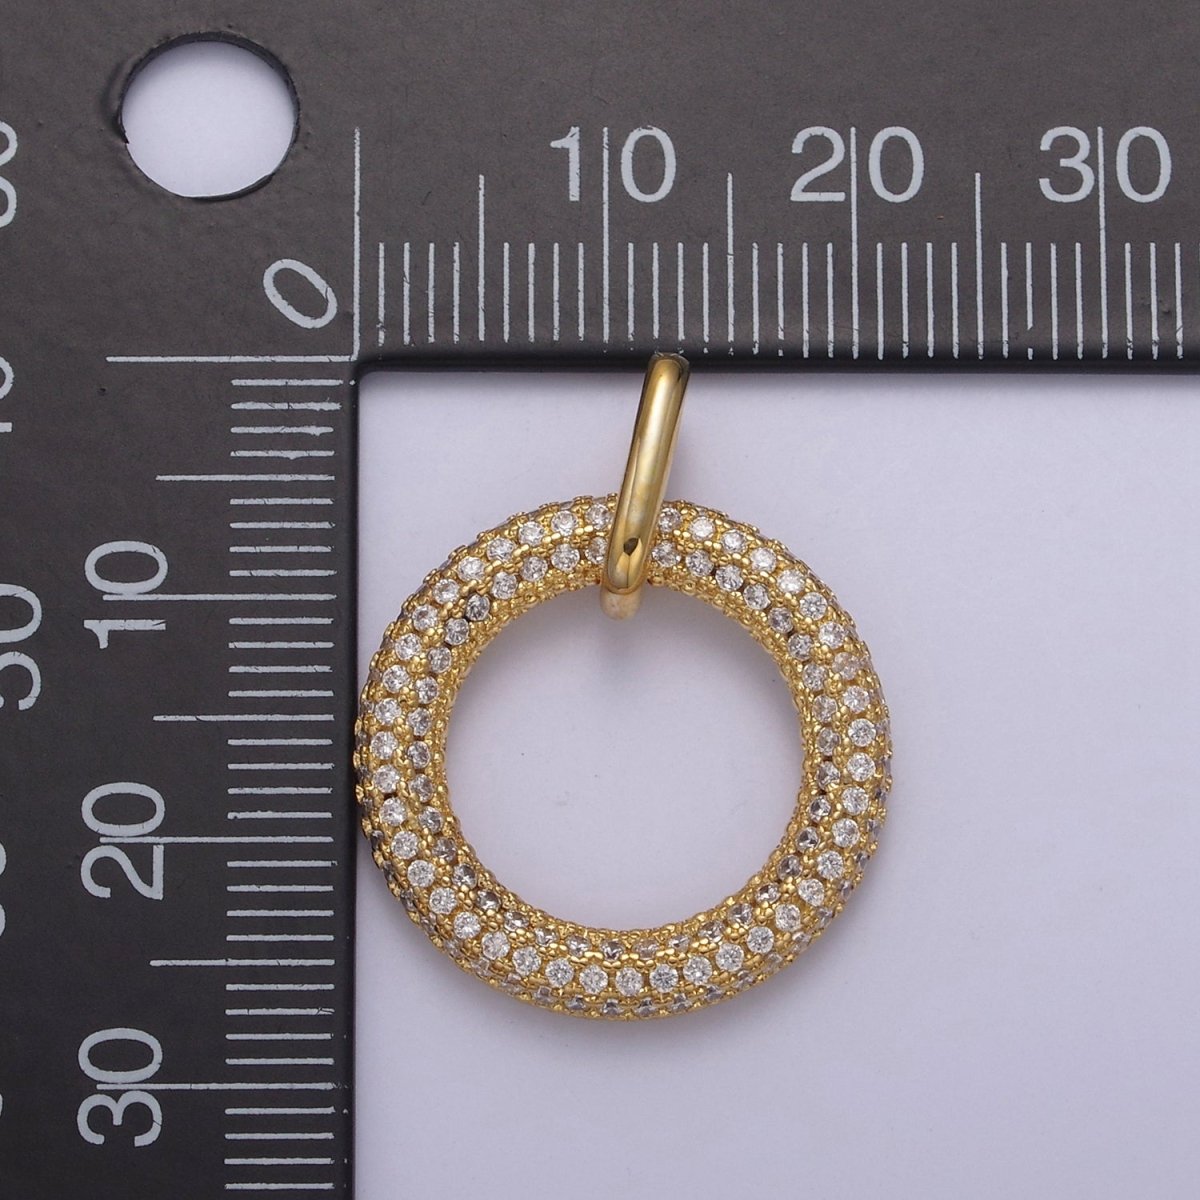 Gold Filled Circle Charm, CZ Pave Round Geometry Jewelry Pendant Quality Jewelry Supply N-544 - DLUXCA